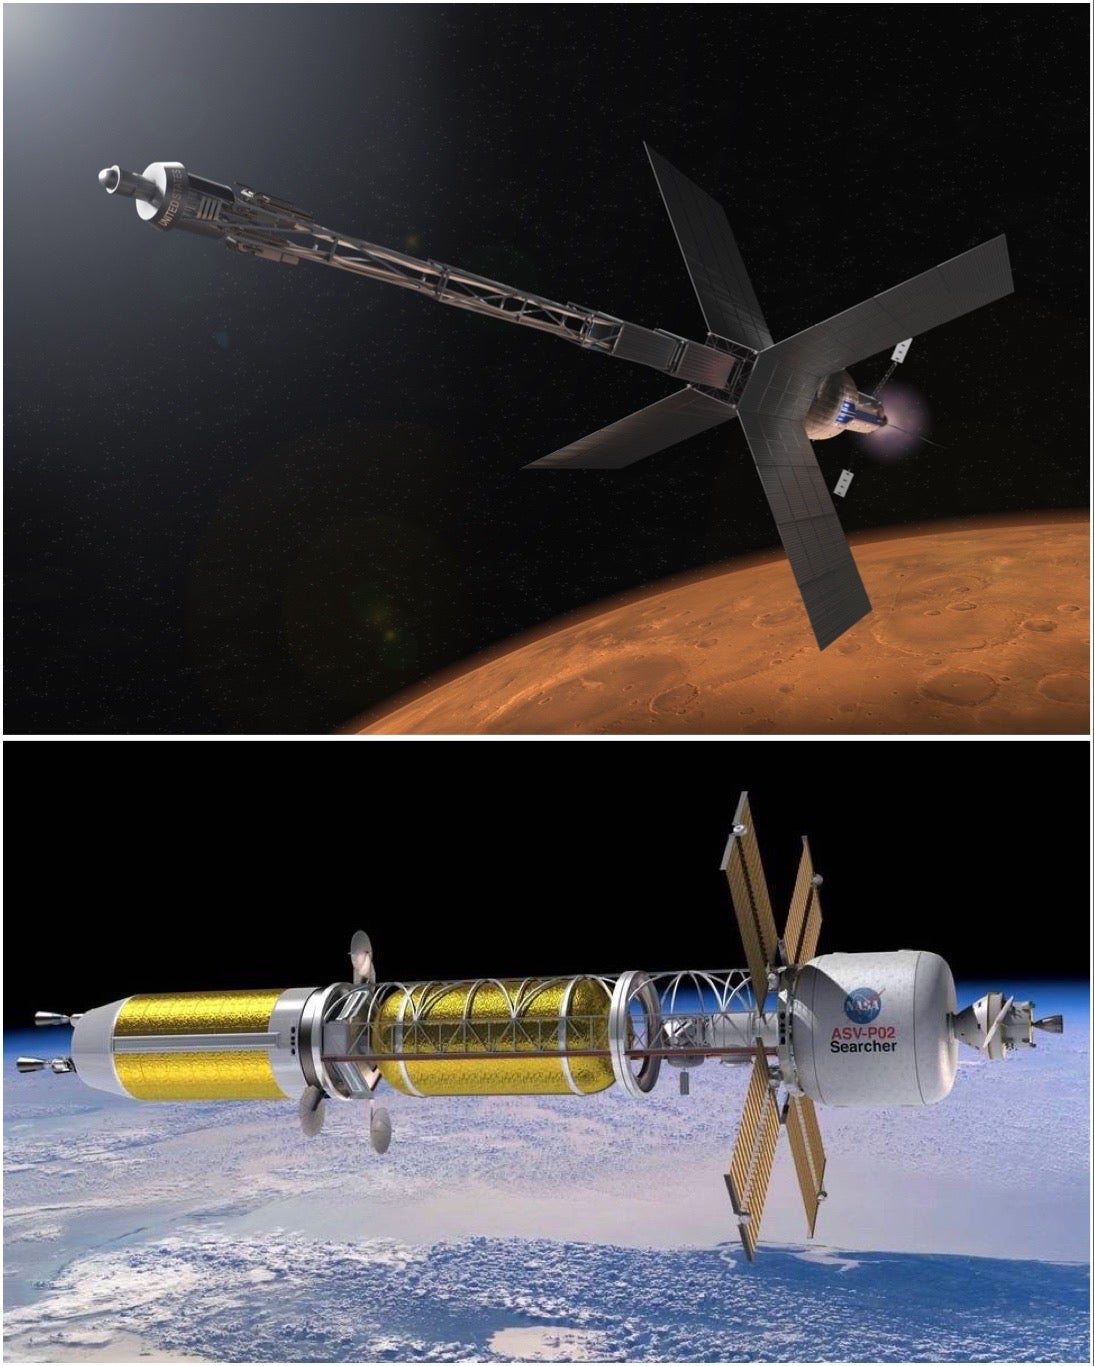 Two illustrations of NASA nuclear propulsion concepts. 